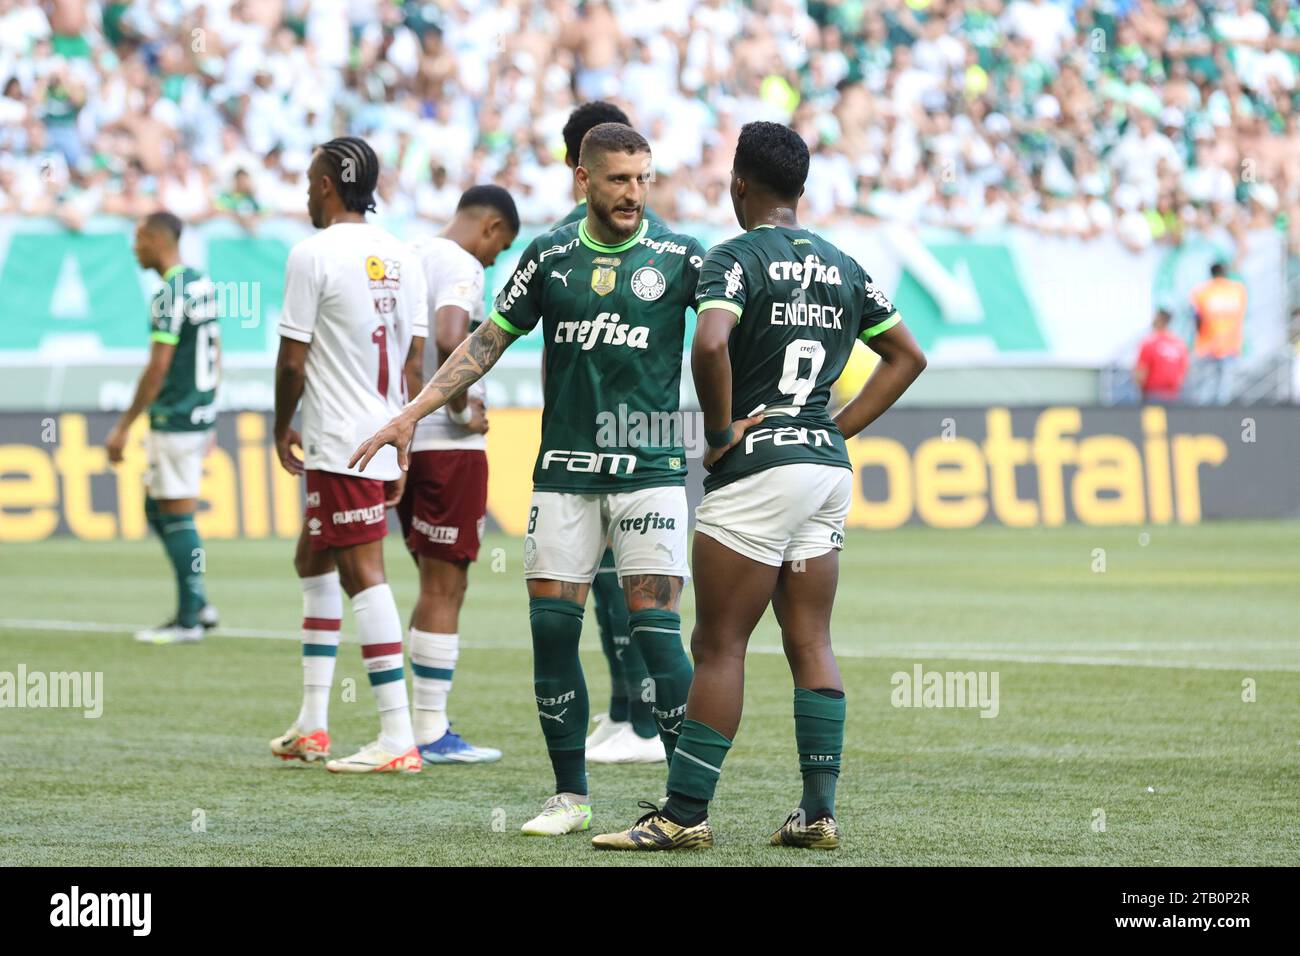 Zé Rafael e Endrick of Palmeiras during the match against Fluminense, in the 37th round of the Brazilian Championship, at Allianz Parque, west of São Paulo, this Sunday, November 3, 2023. Credit: Brazil Photo Press/Alamy Live News Stock Photo